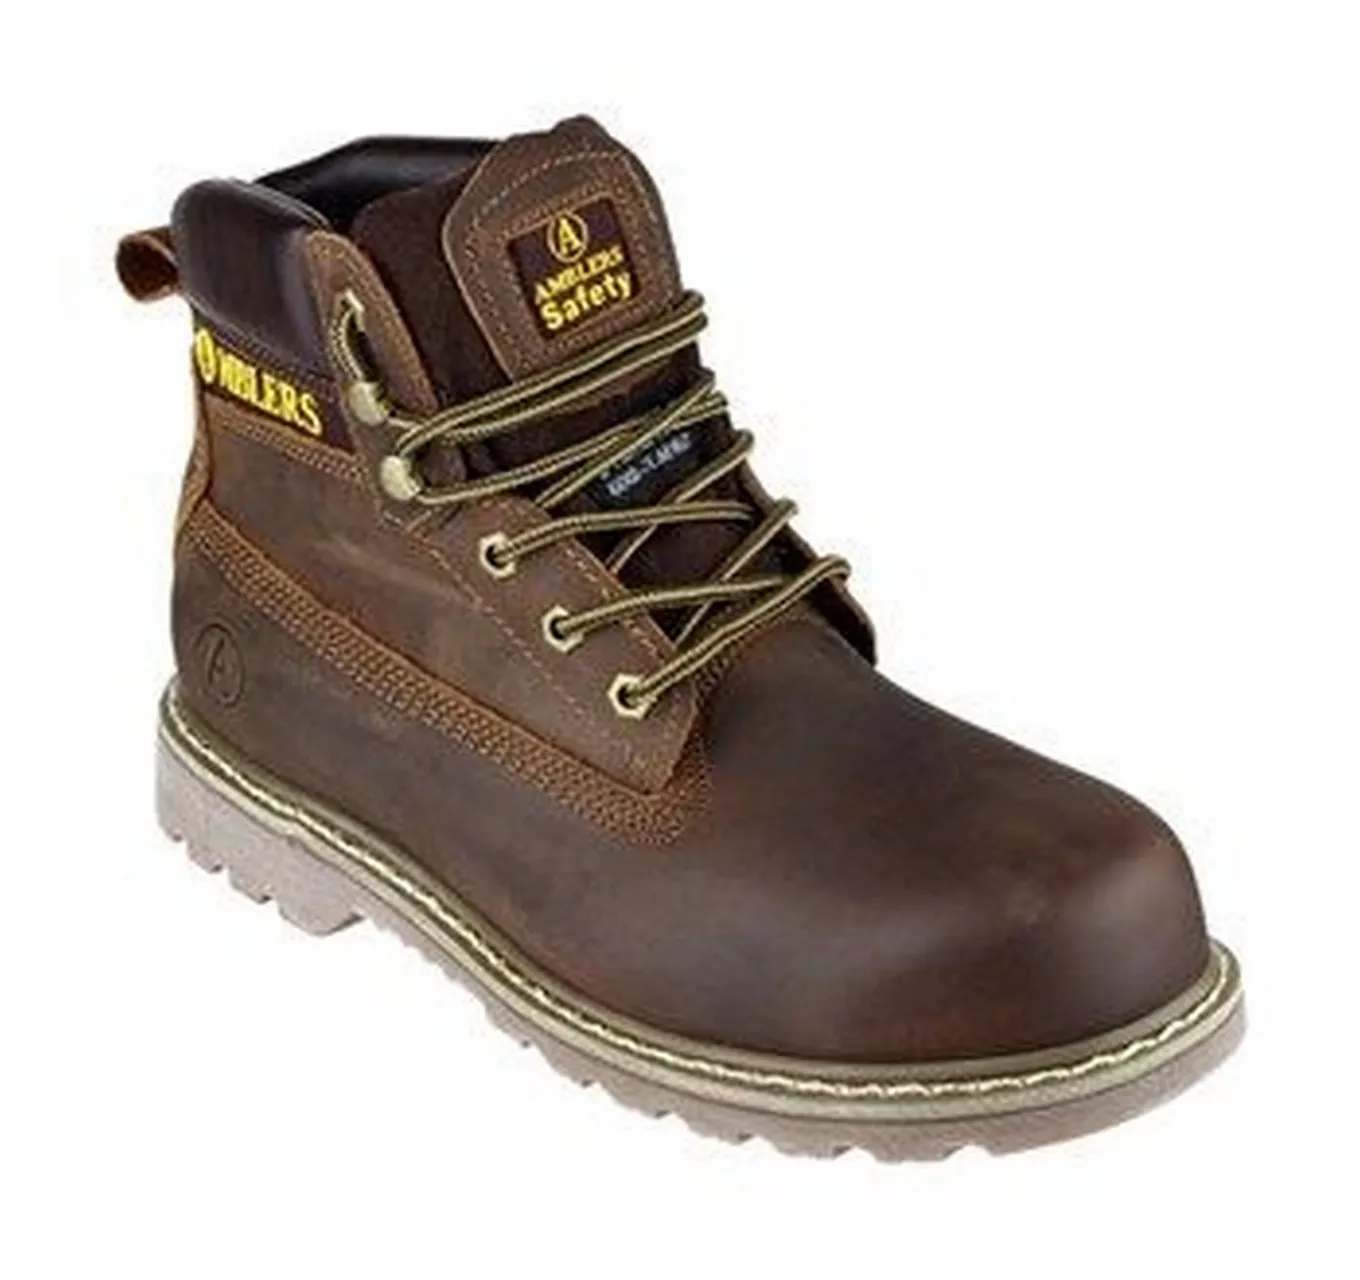 Safety Boot Amblers Fs164 Brown 6